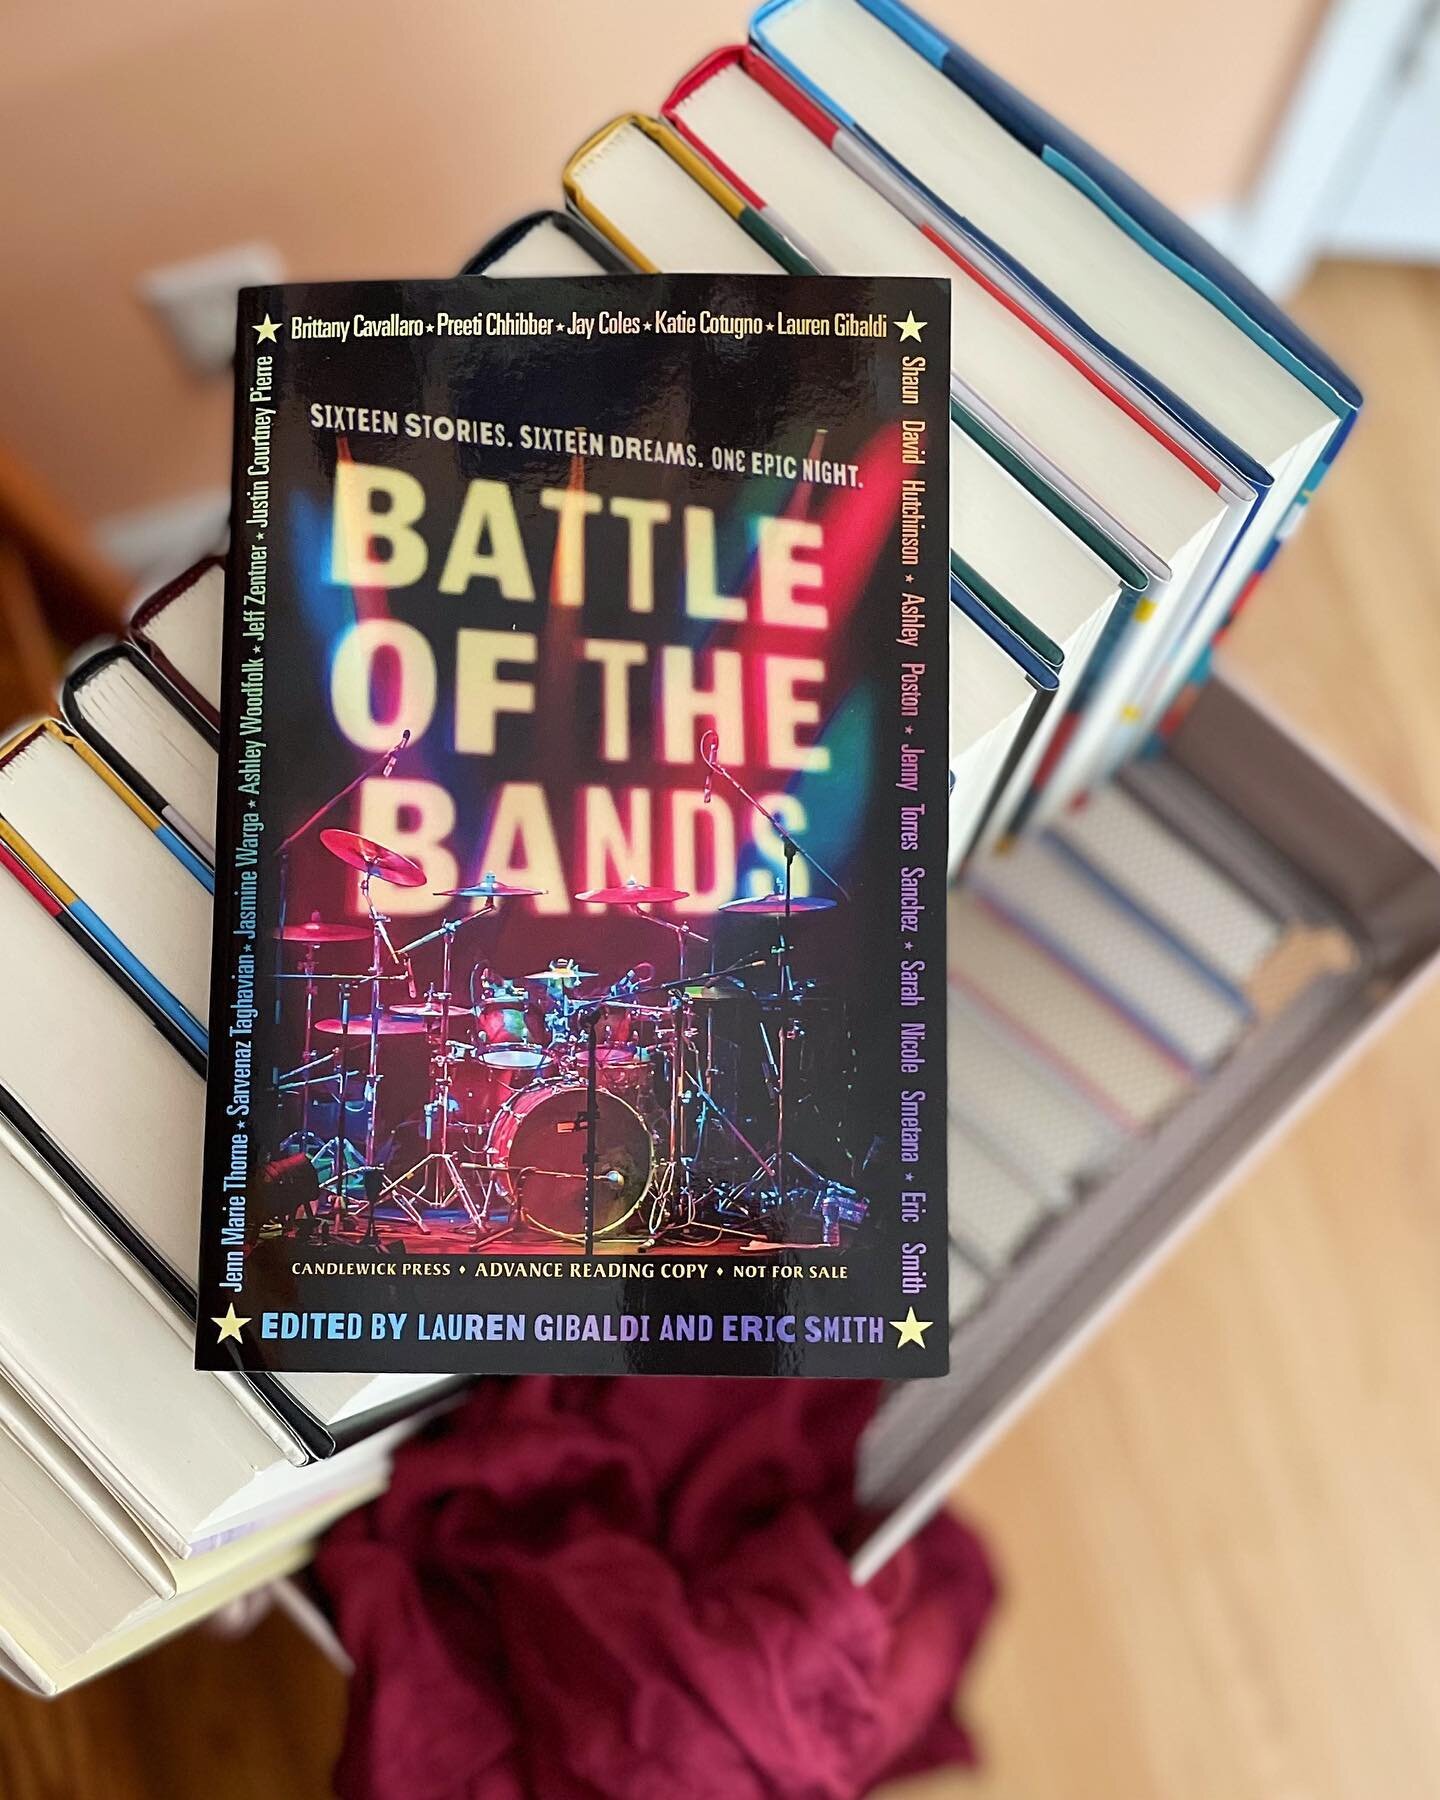 What was your high school crew? Musician? Jock? Model UN? Band Kid? 

I was a theater kid. Surprise surprise.

One of my favorite things about Battle of the Bands is that it felt like *every* teenager appeared in the stories. The hyper-organized stag